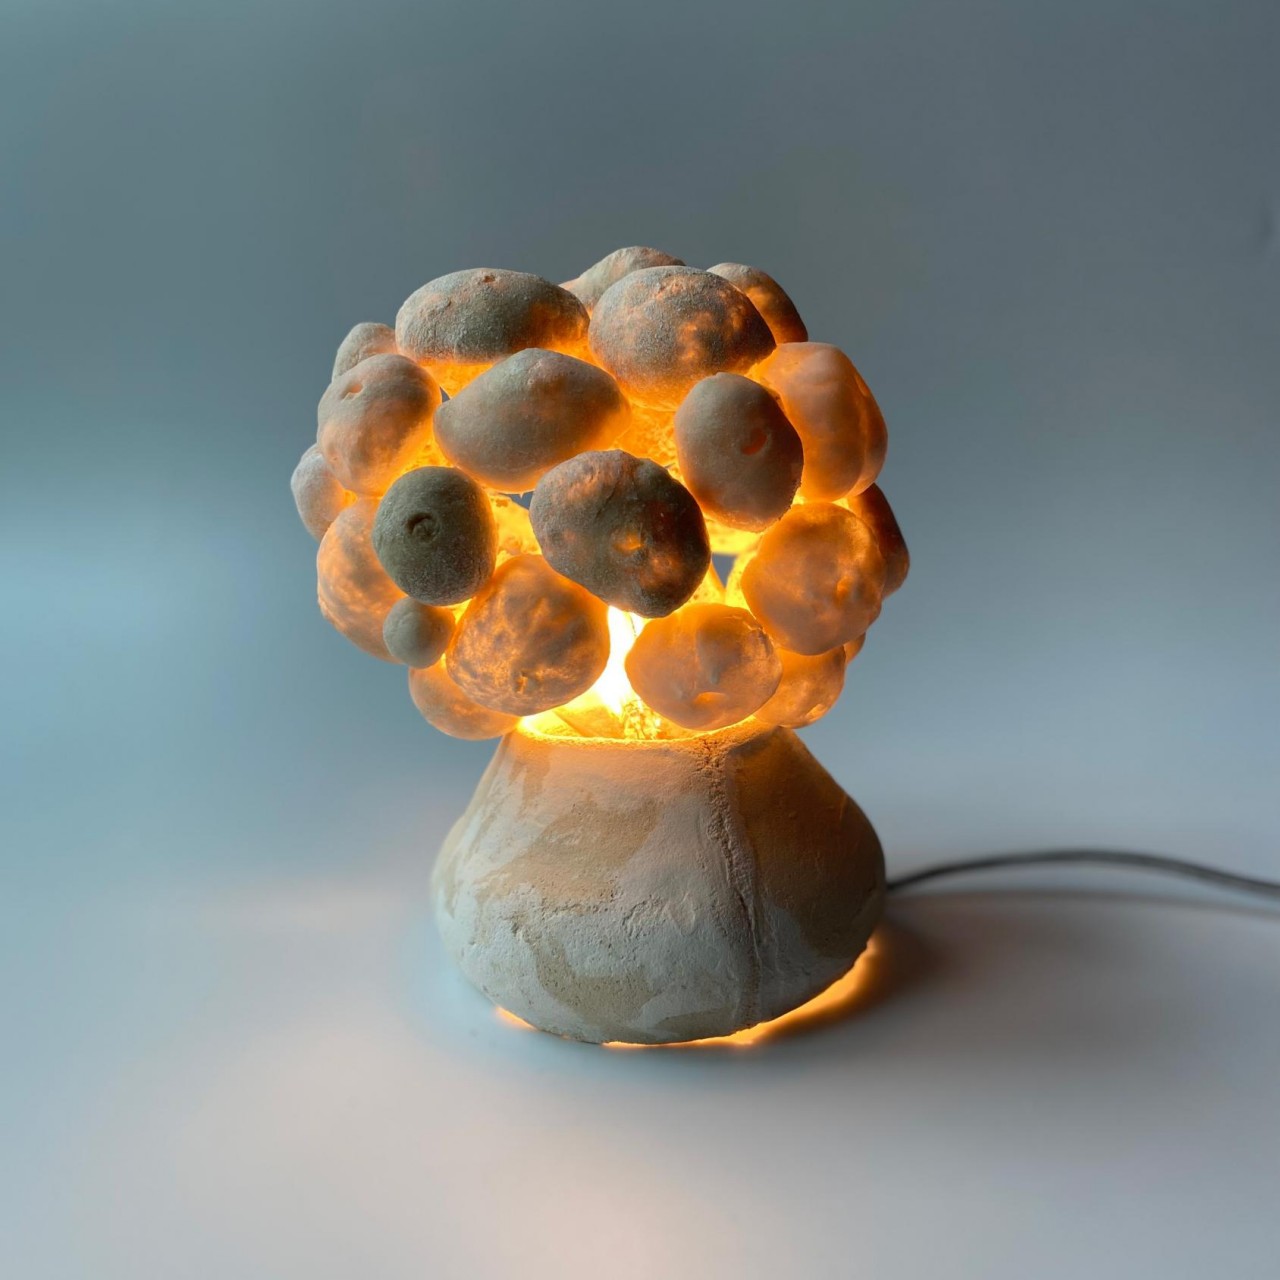 These clay-like vases and lamps are actually made from eggshells and tapioca starch